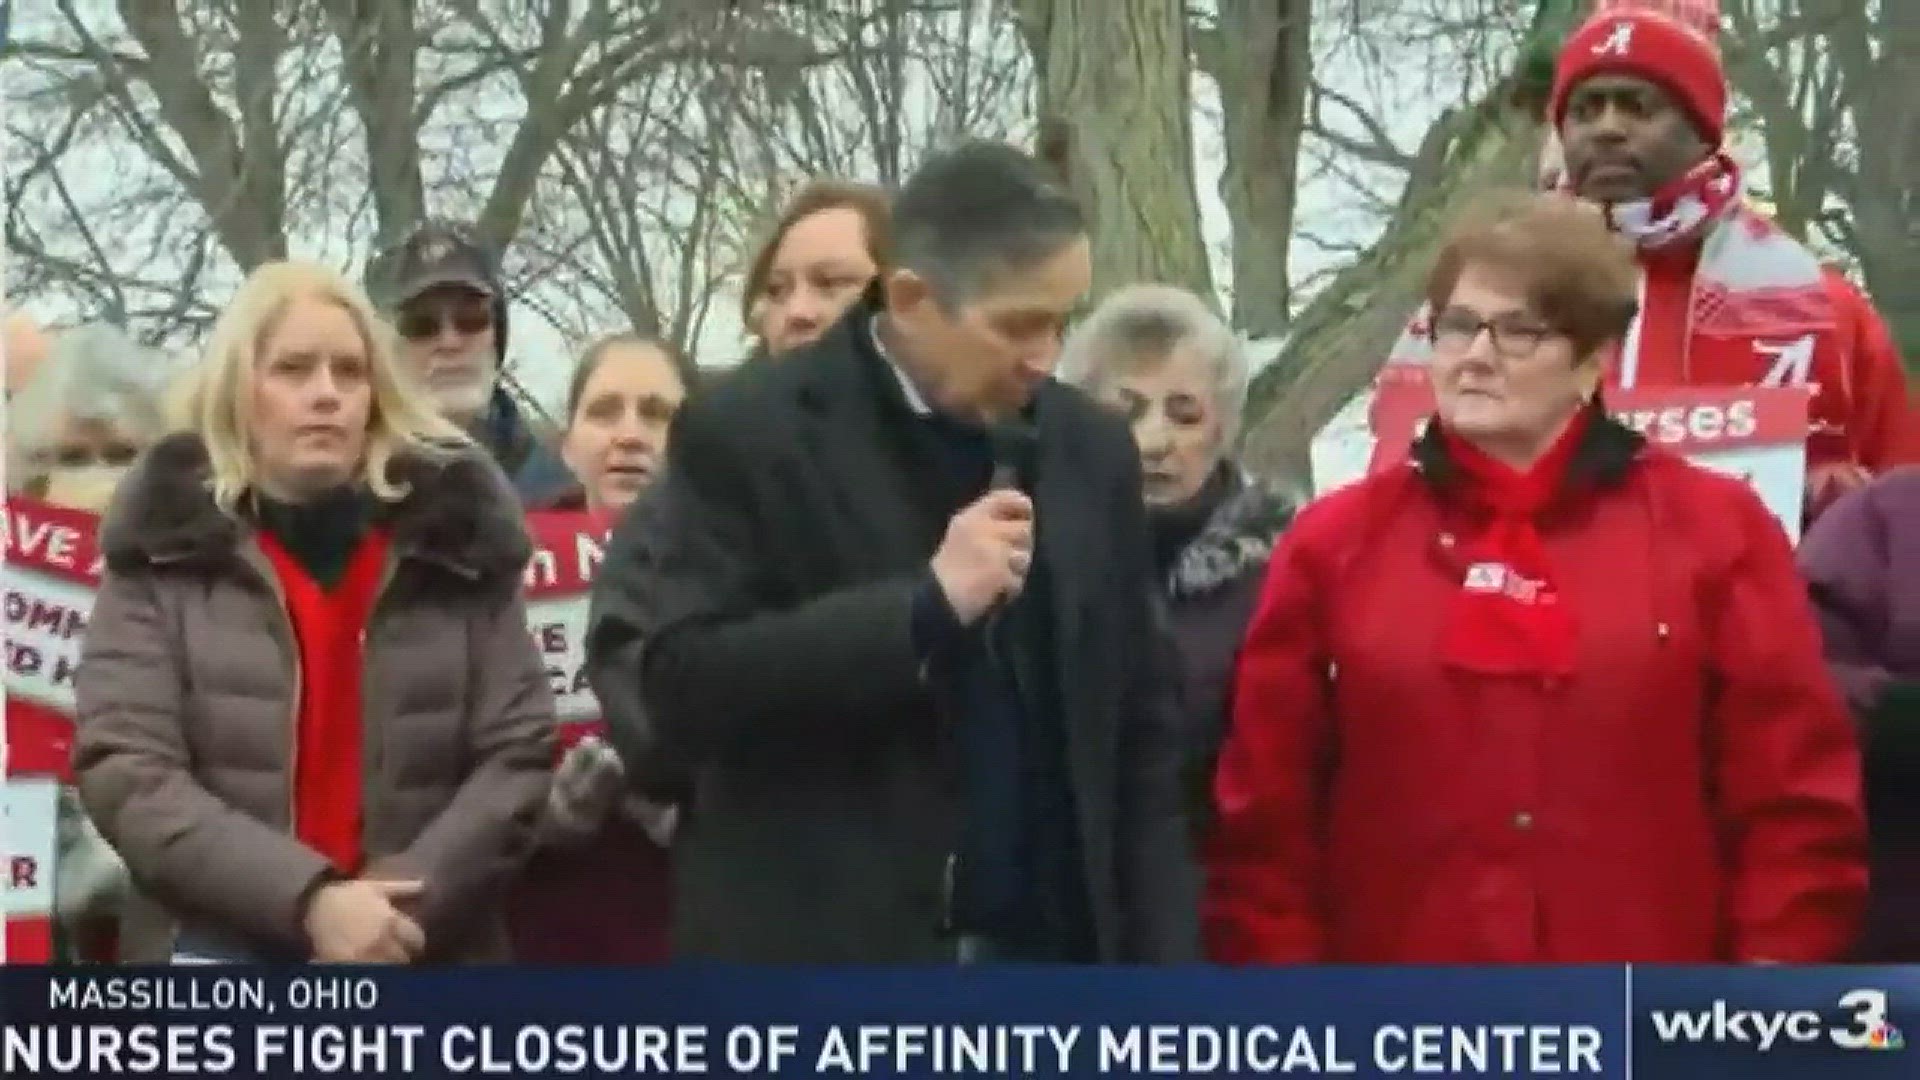 Jan. 9, 2018: A group of nurses joined together with local leaders like Dennis Kucinich to fight against the closure of Massillon's Affinity Medical Center. Here's what Kucinich had to say...